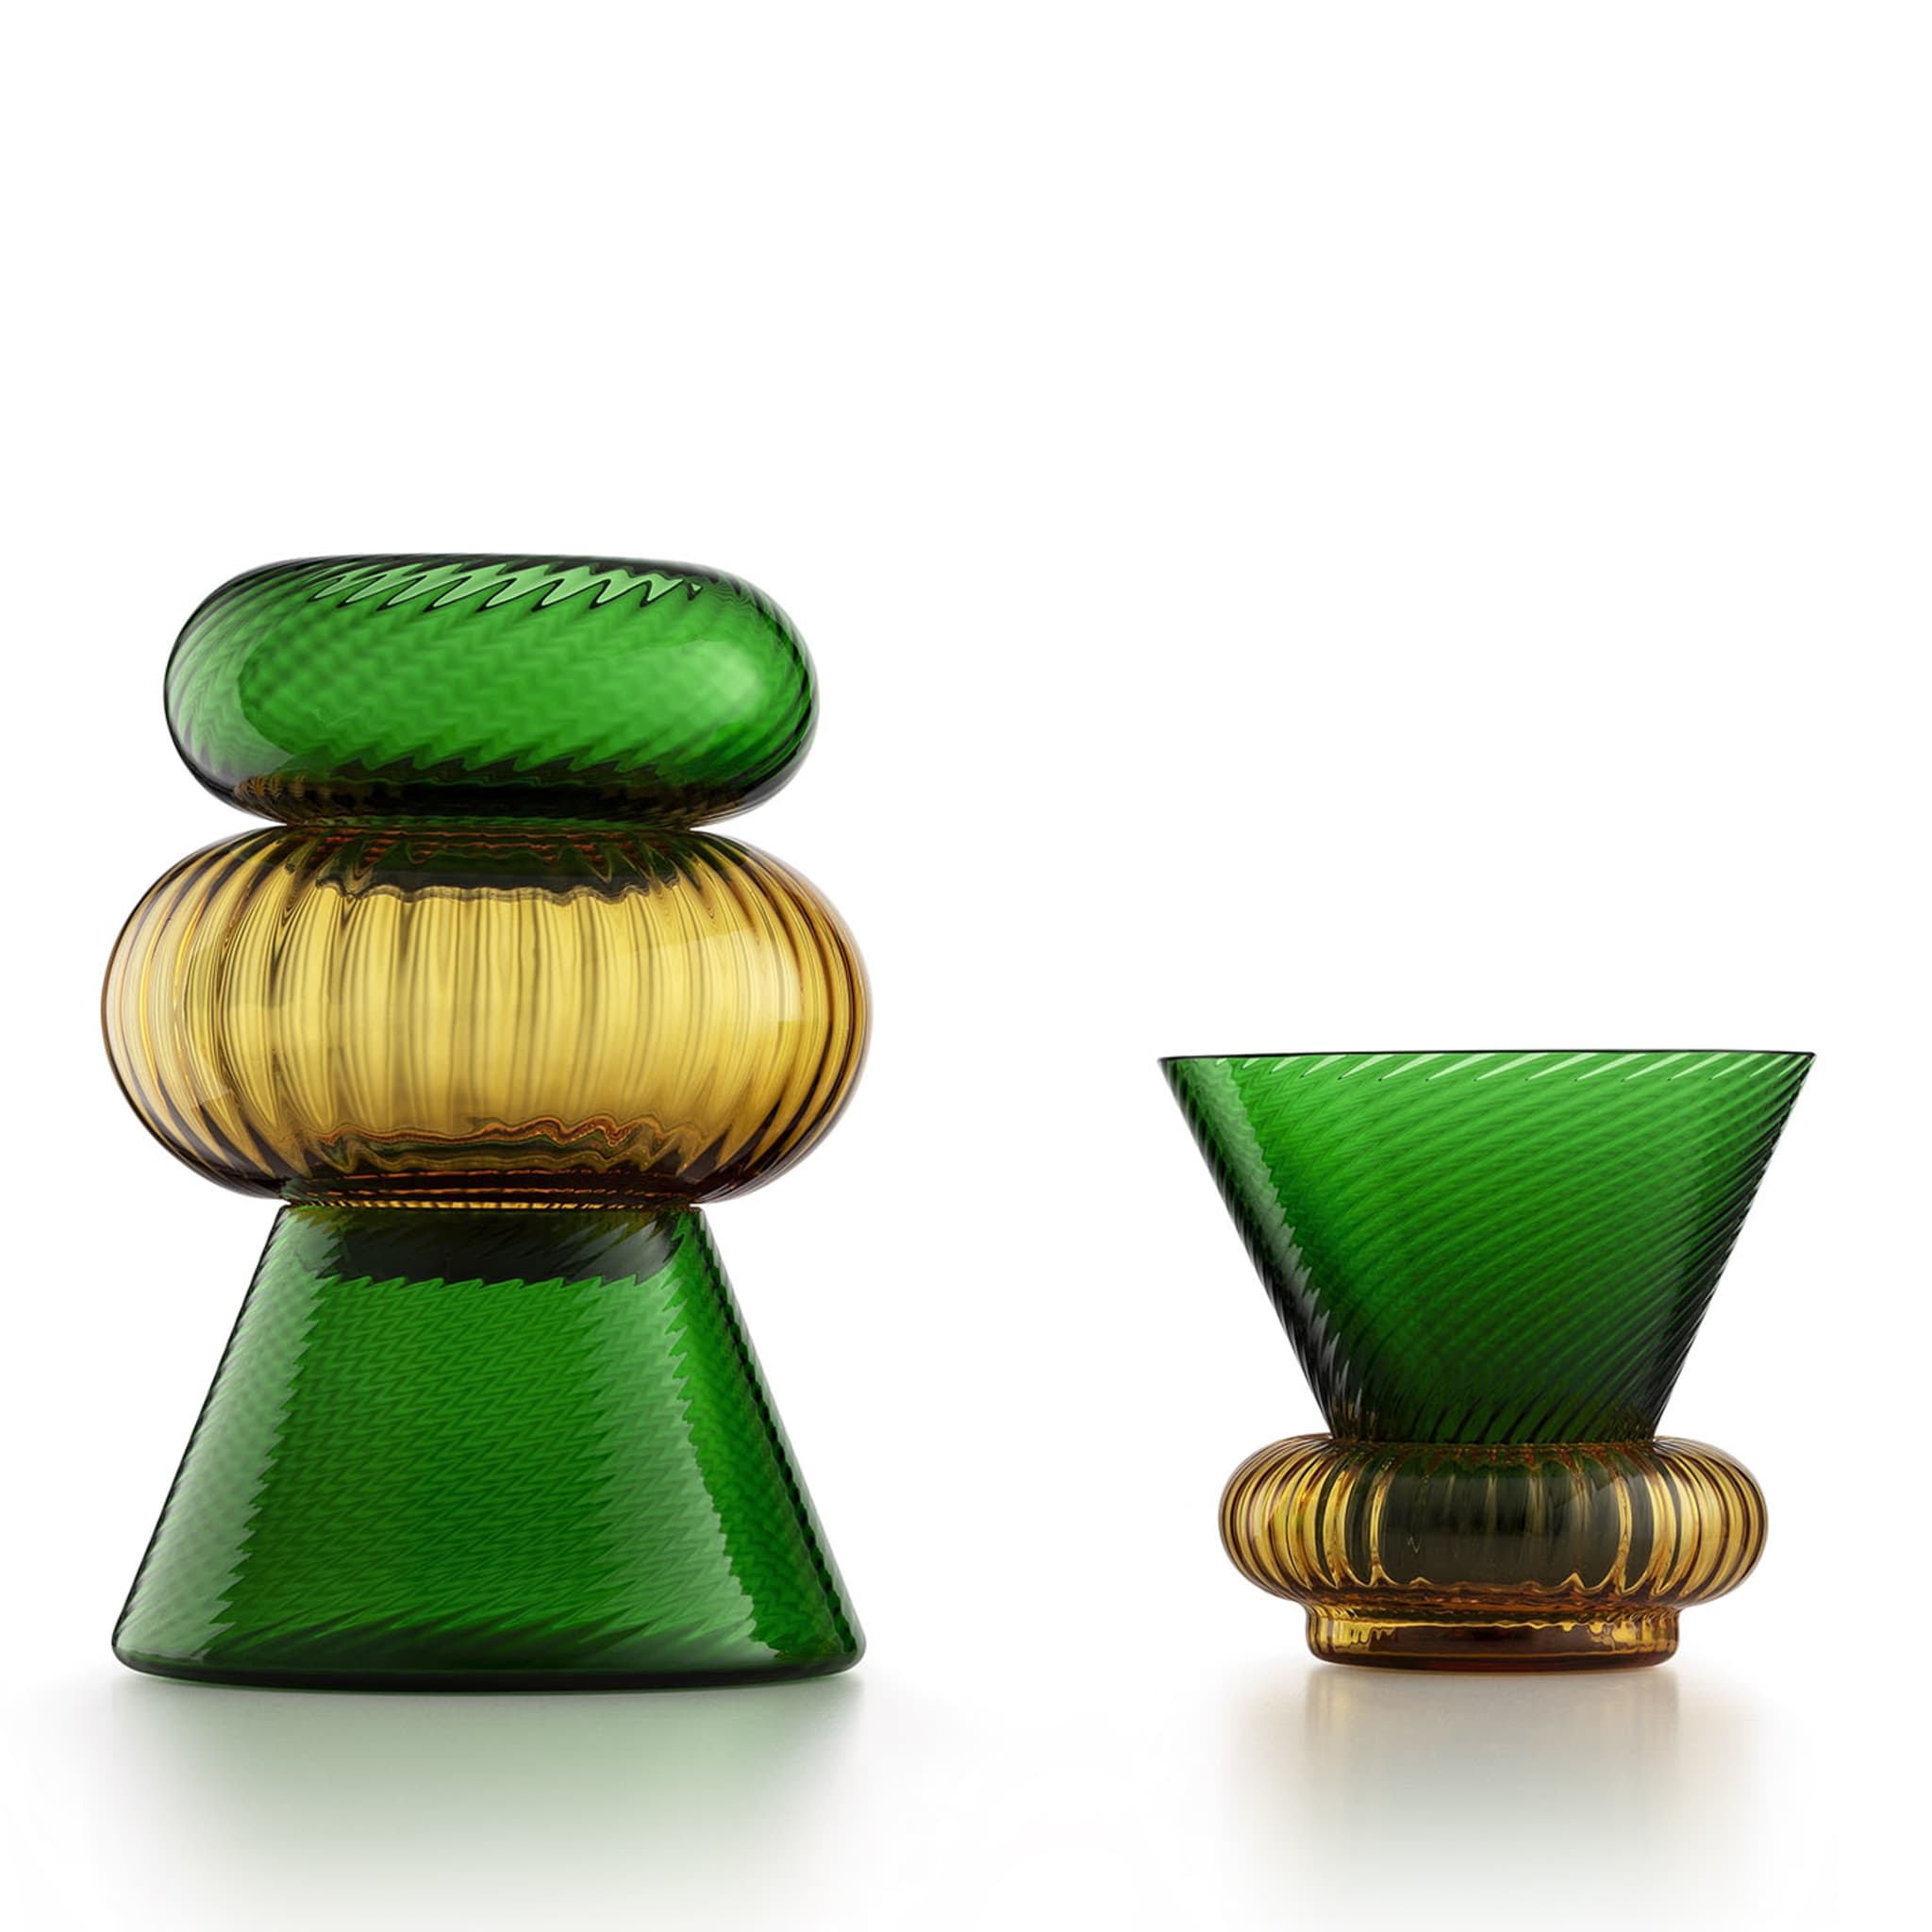 Issey Set of 5 Green and Amber Vases By Matteo Zorzenoni - Alternative view 4